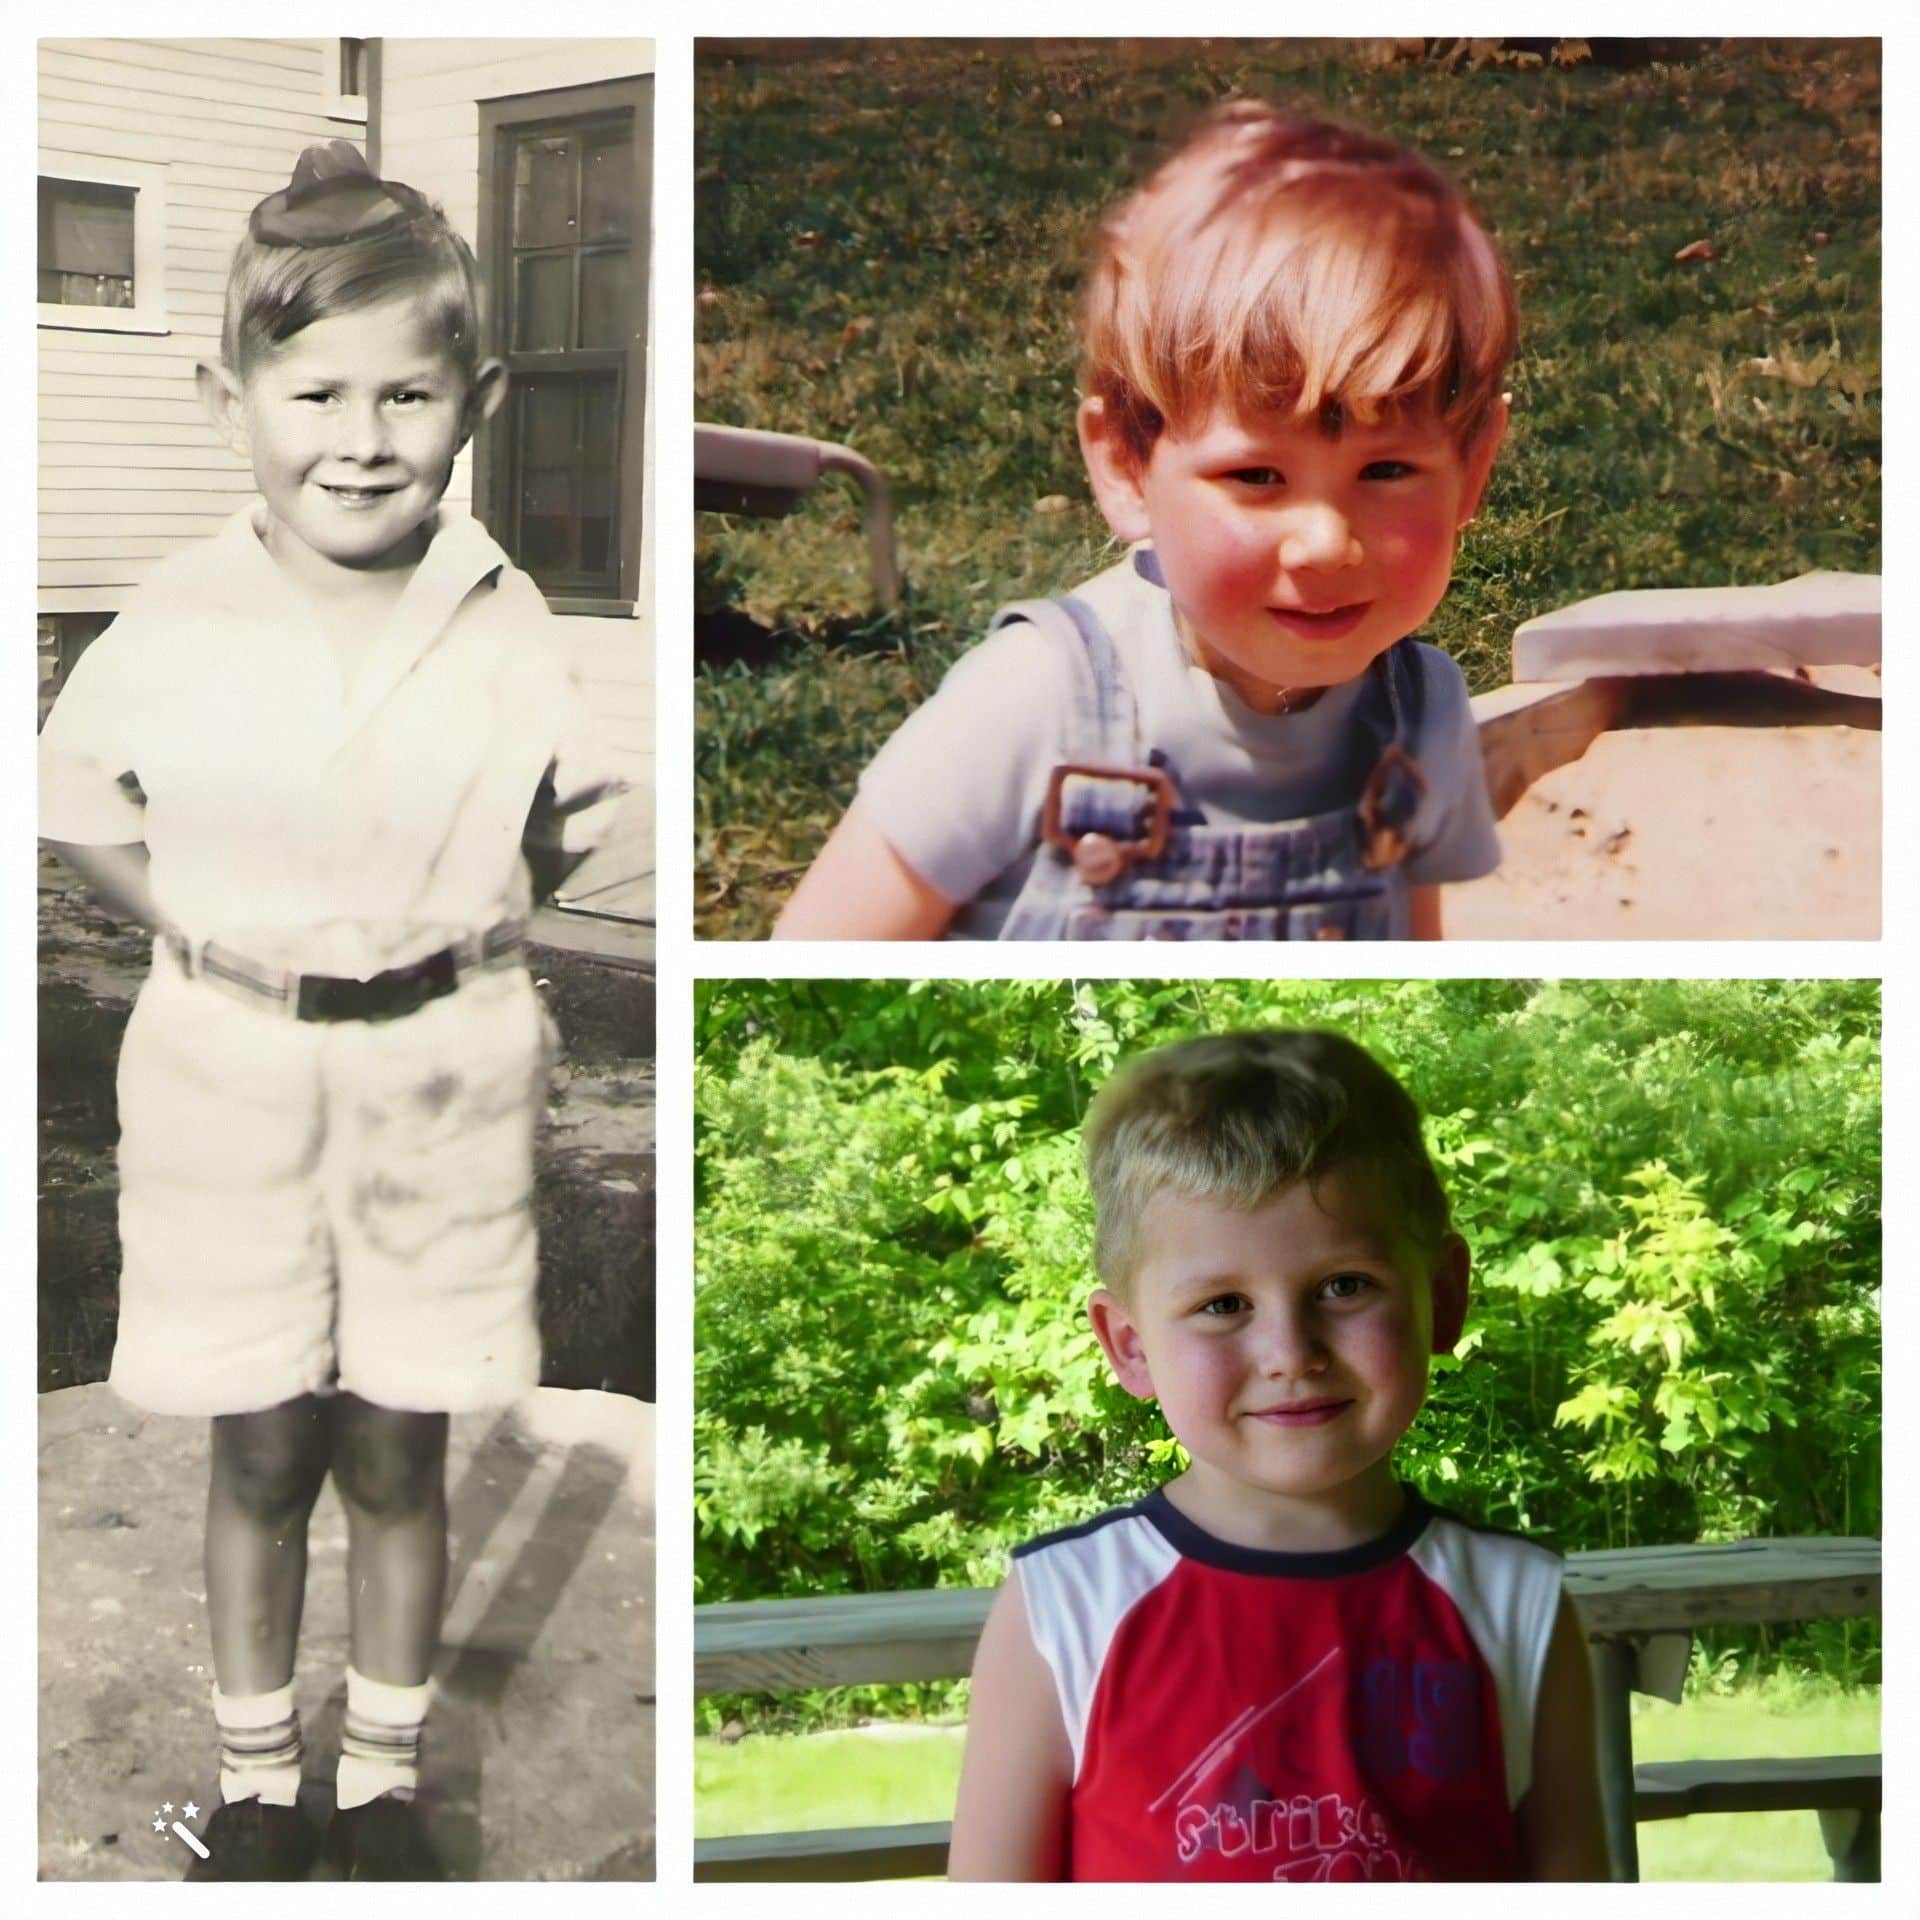 George Dennis Bastion (left), Michael Lee Foster (top right), and Brandon Michael Foster (bottom right)